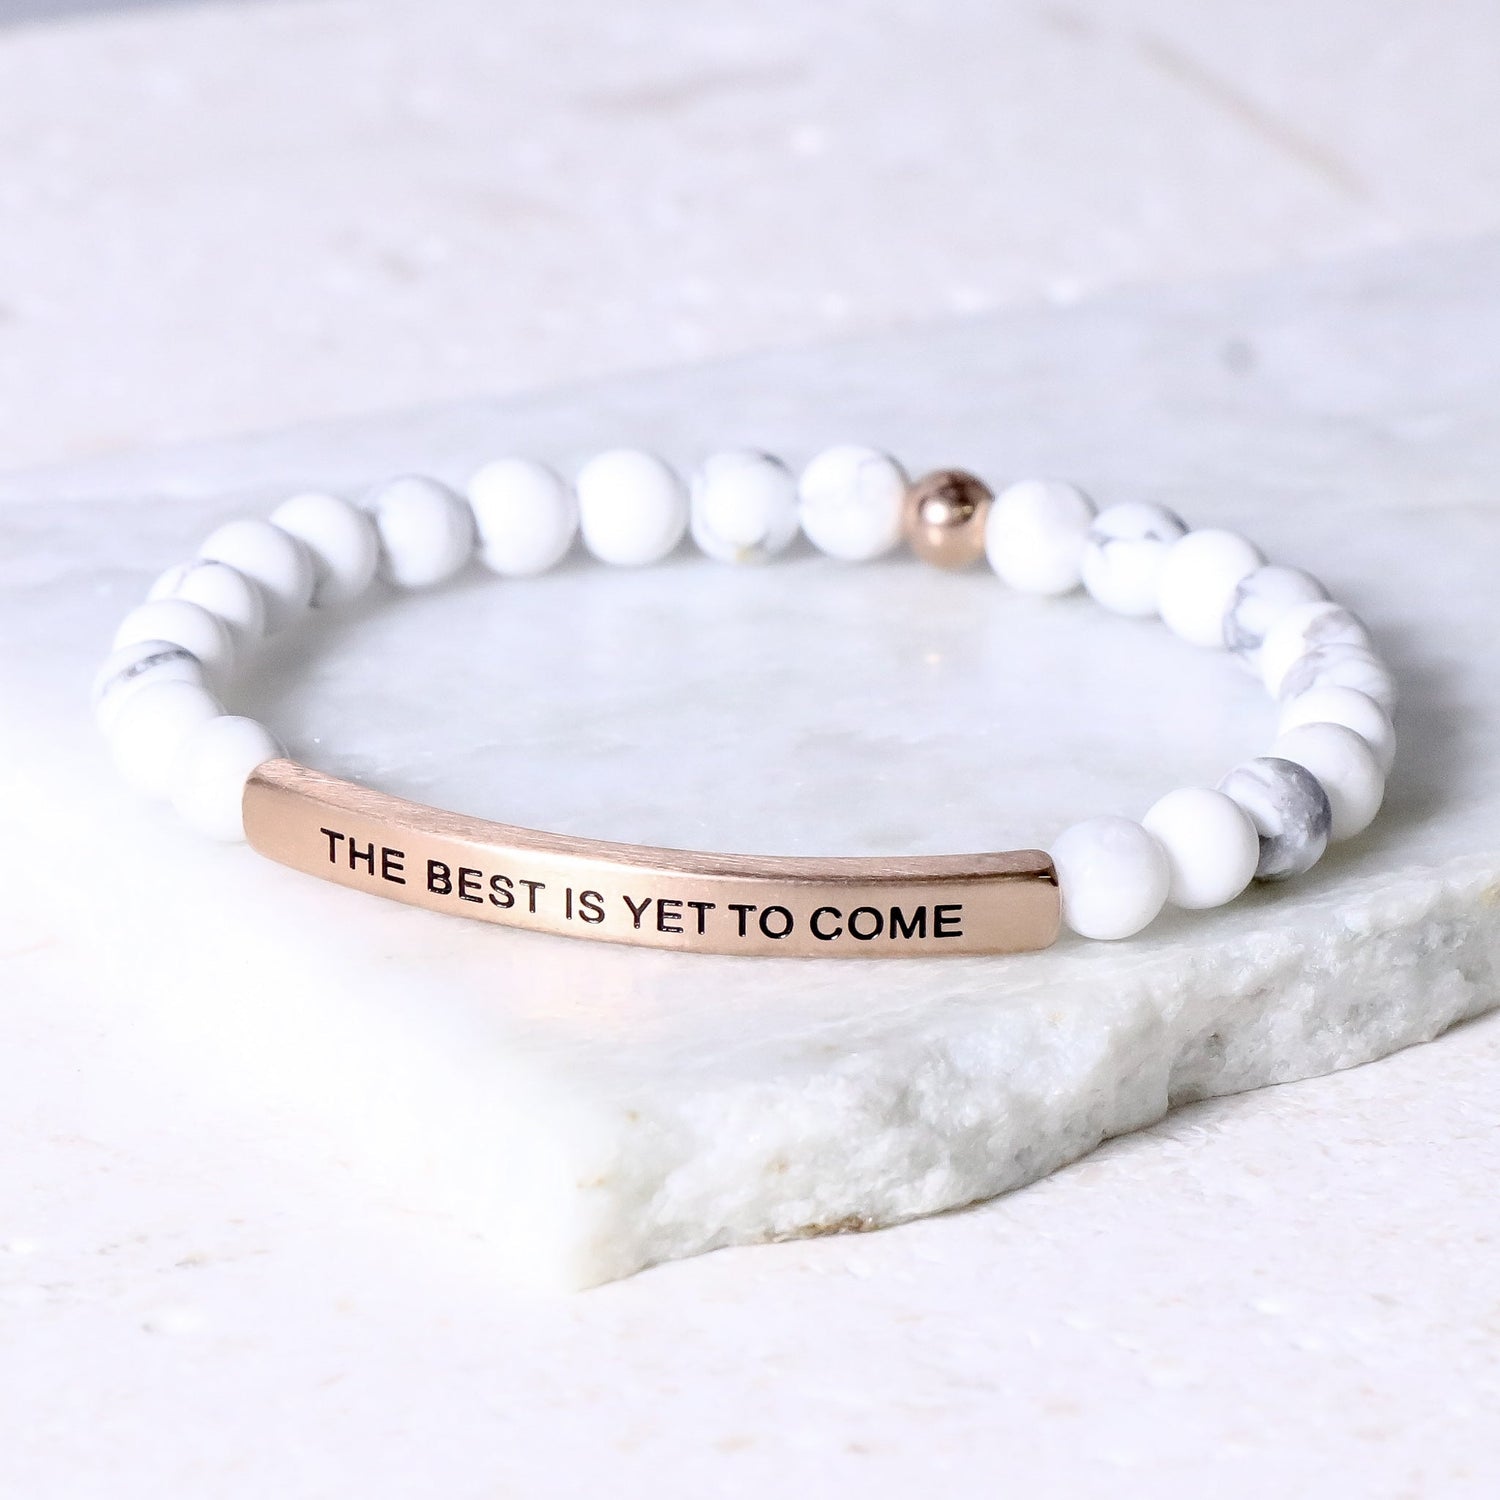 Inspire Me Bracelets-The Best Is Yet to Come-Bracelet Howlite Marble / Small (6in-7in) Average Woman Size